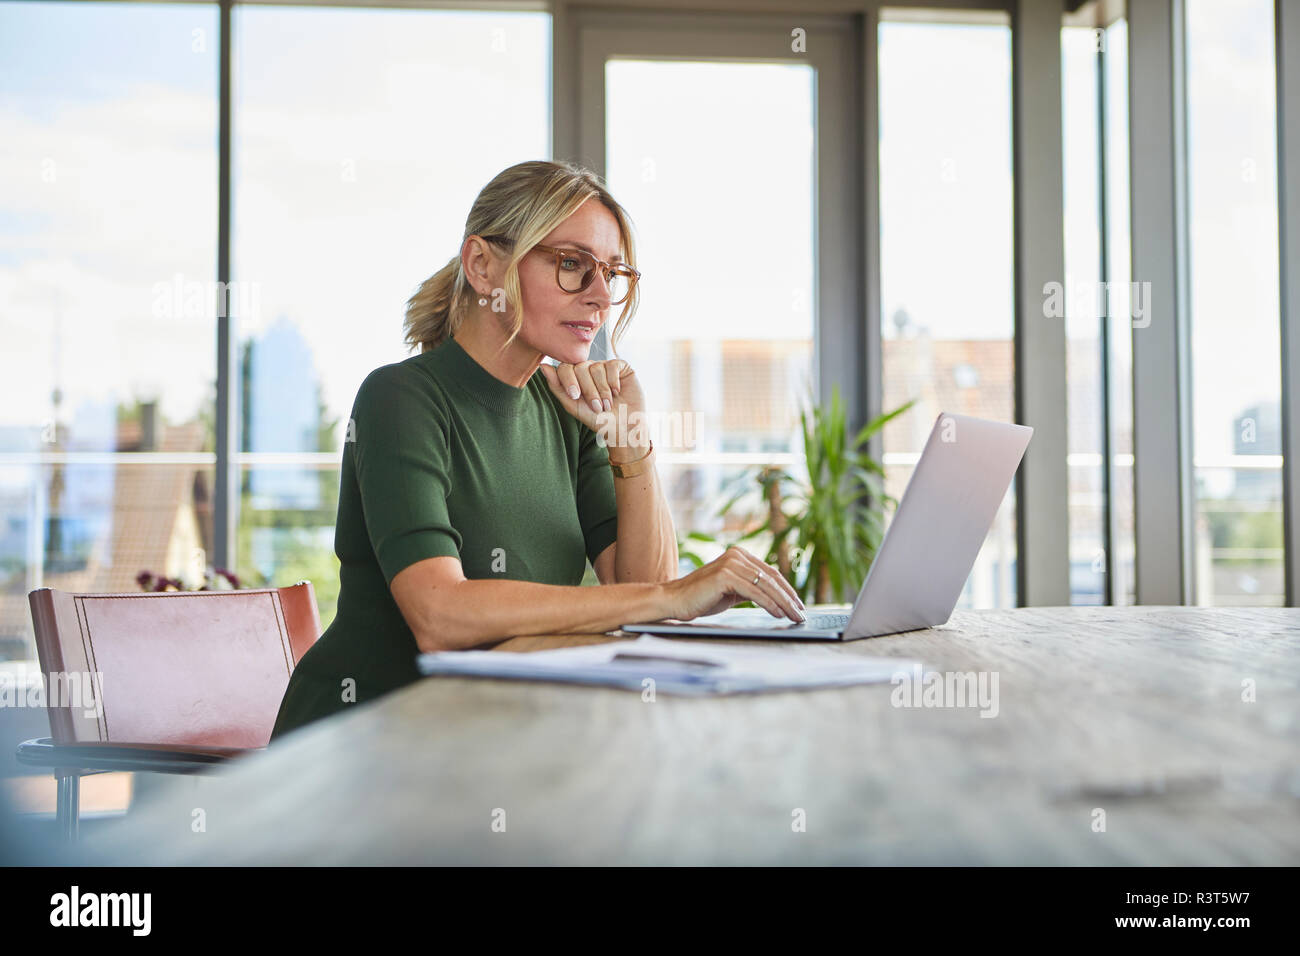 Mature woman using laptop on table at home Stock Photo